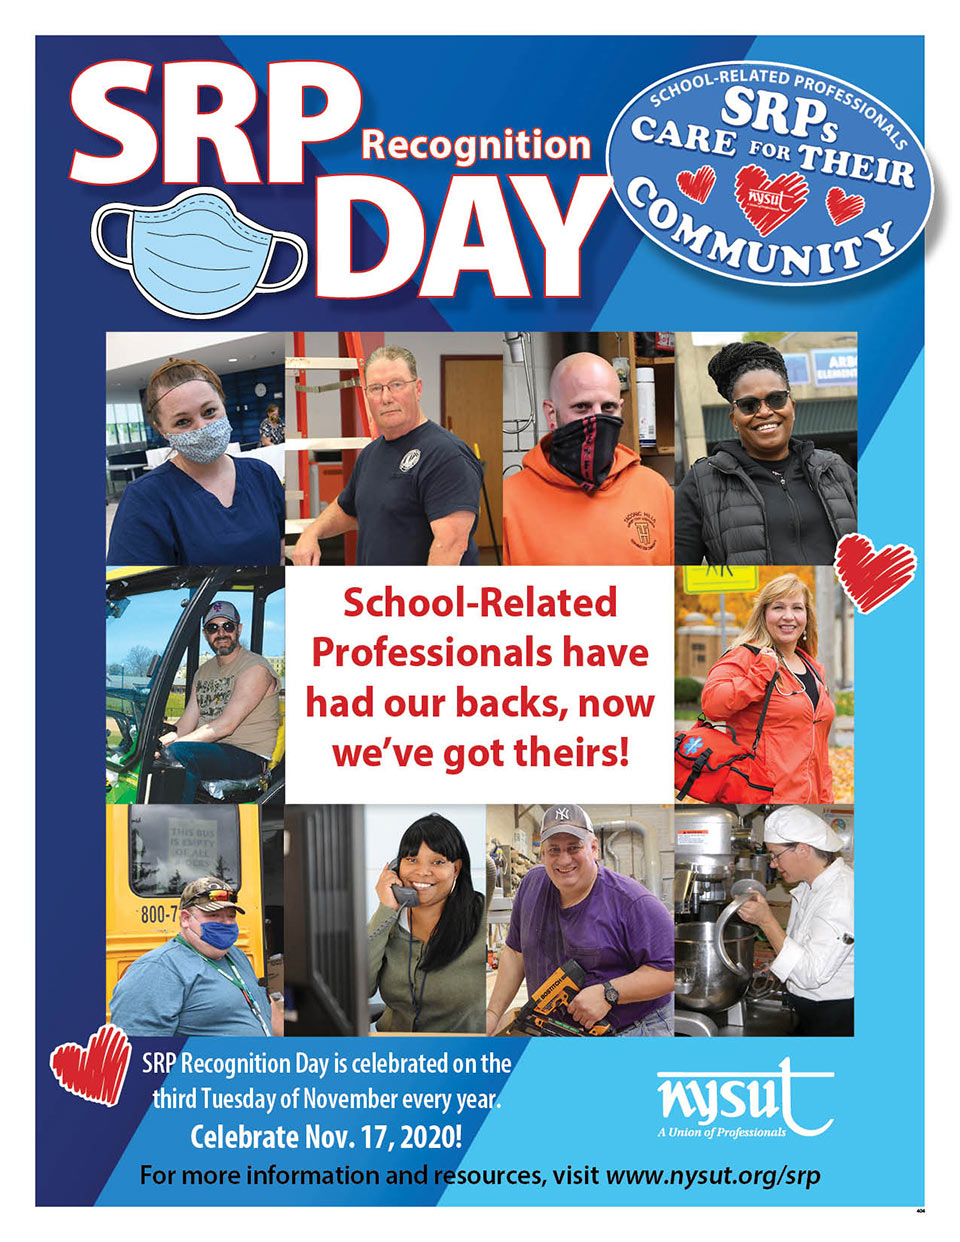 srp day poster 2020